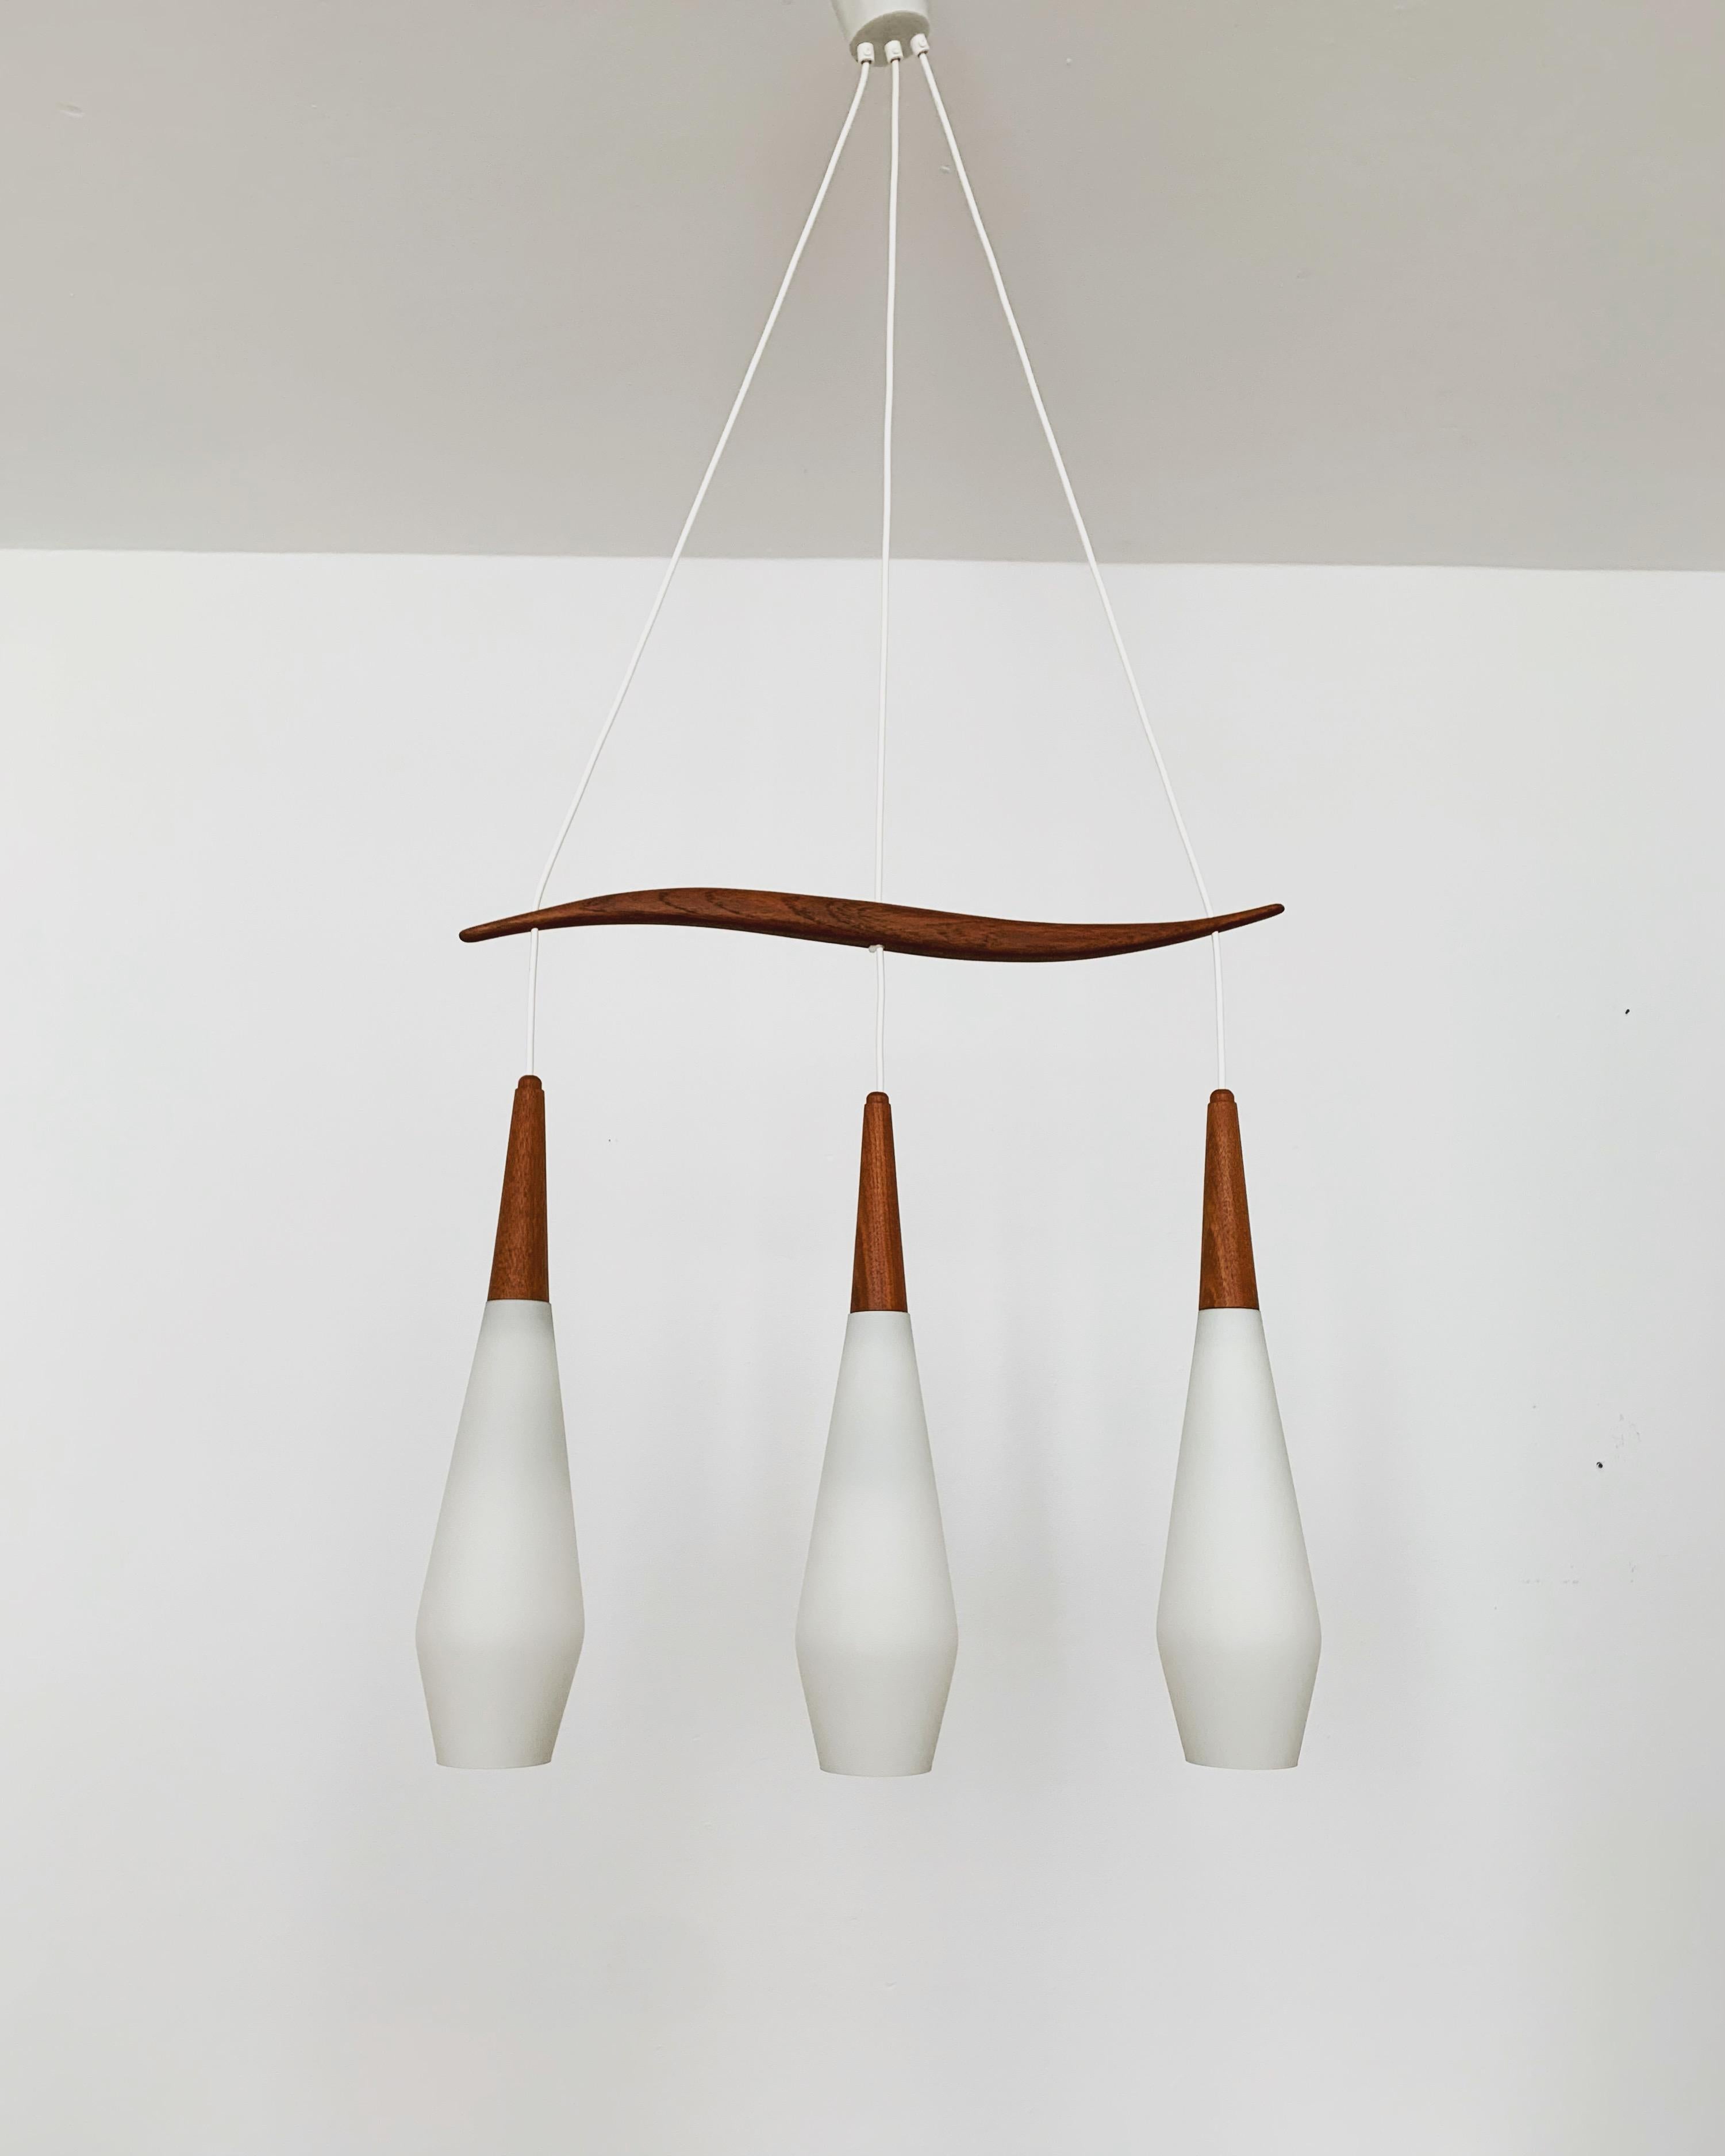 Wonderful opal glass pendant lamp from the 1960s.
Great and exceptionally minimalistic design with a fantastically elegant look.
Very nice teak details.

Condition:

Very good vintage condition with slight signs of wear consistent with